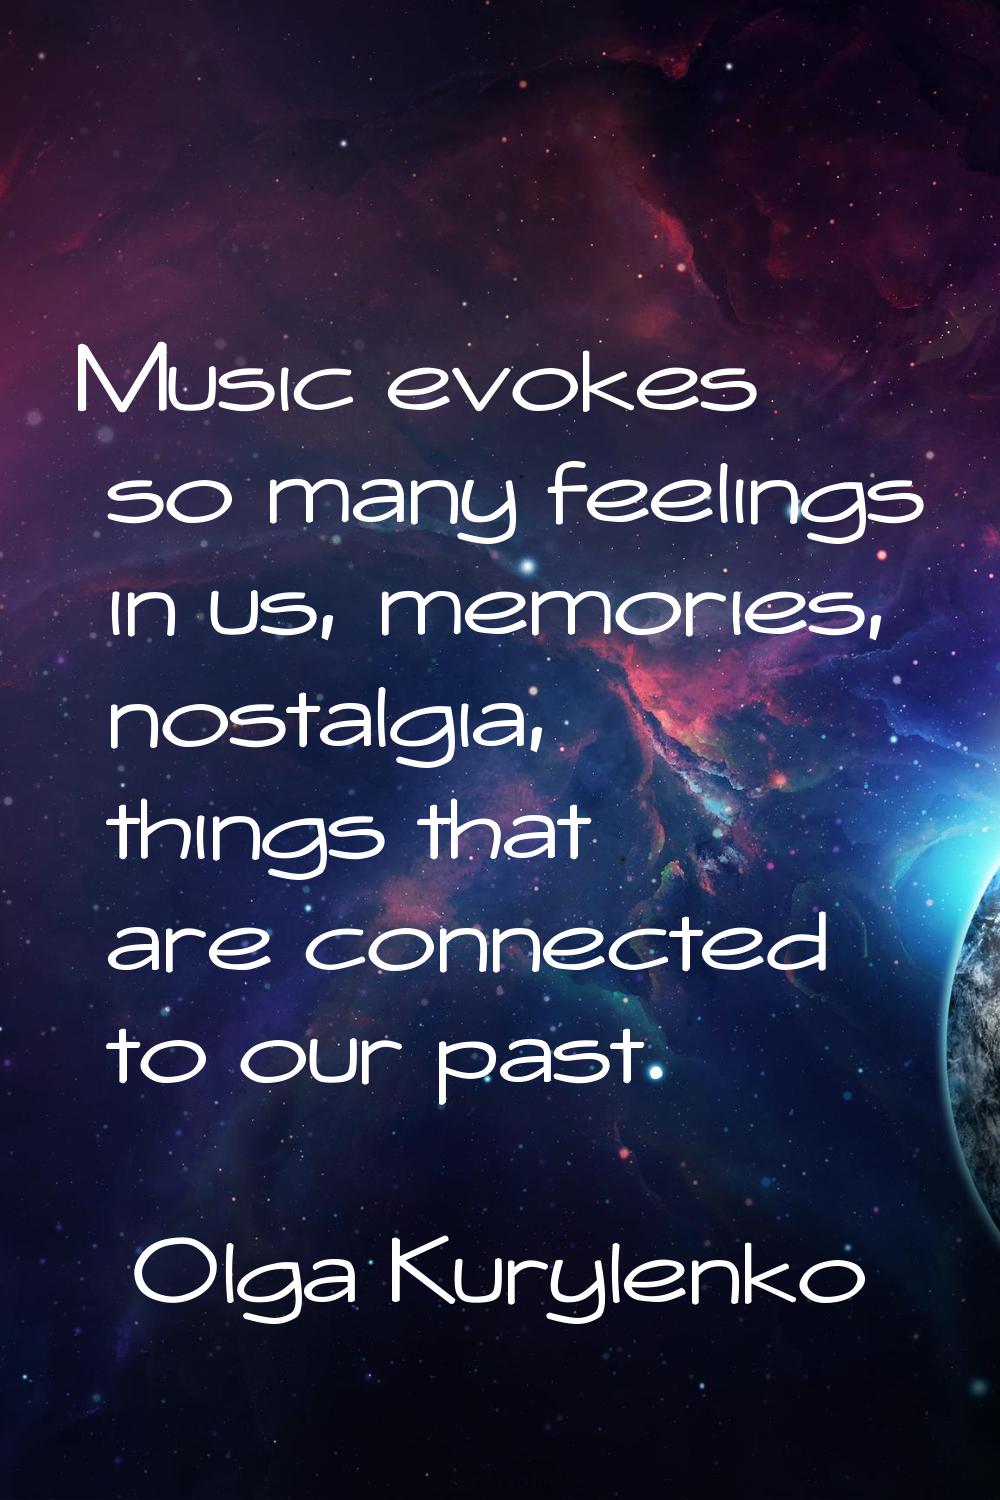 Music evokes so many feelings in us, memories, nostalgia, things that are connected to our past.